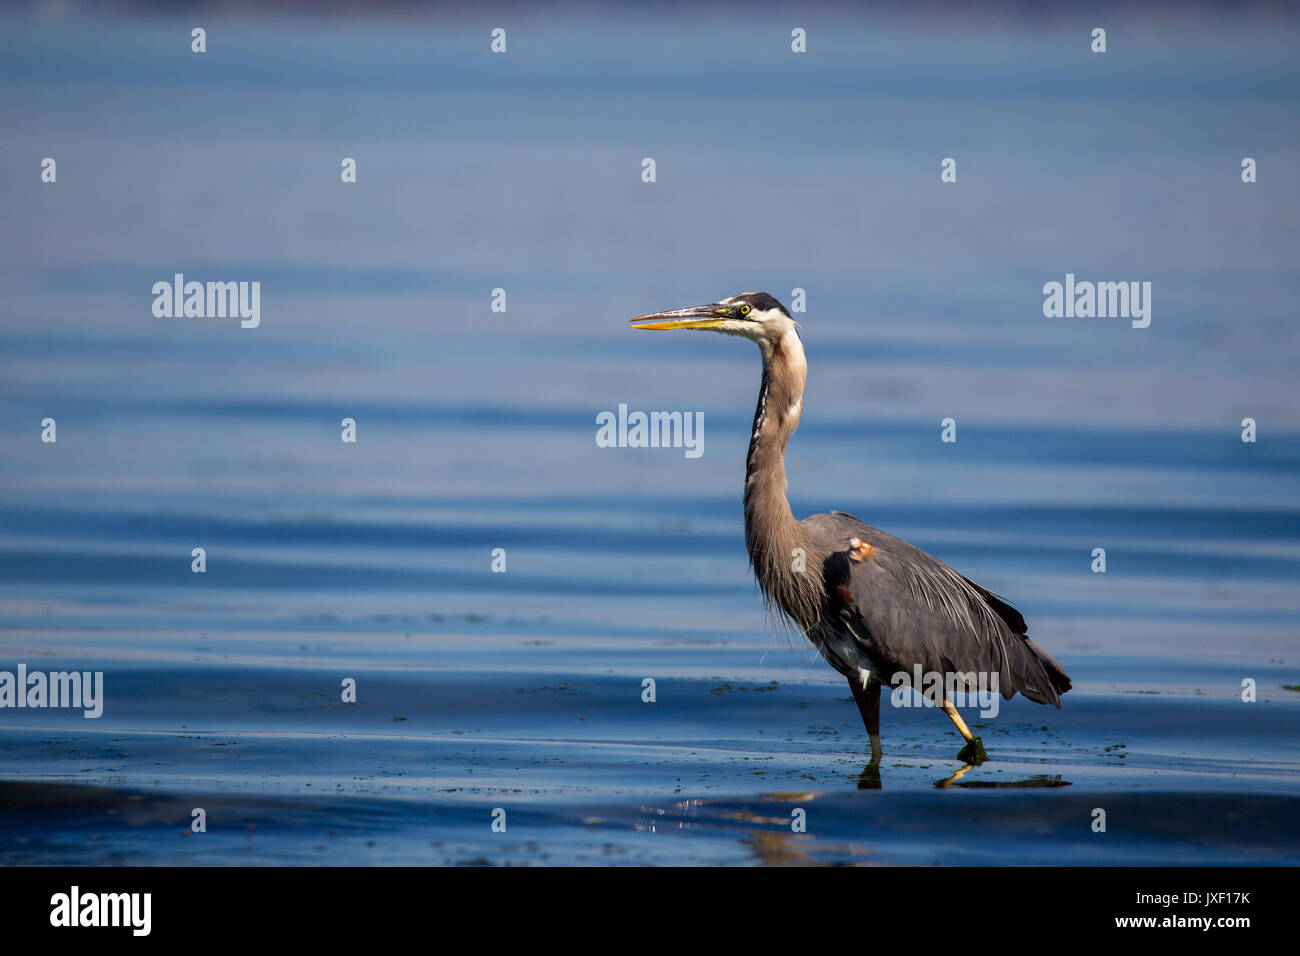 Great blue heron (Ardea herodias) in the shallow water at Island View Beach on Vancouver Island, Canada. Stock Photo